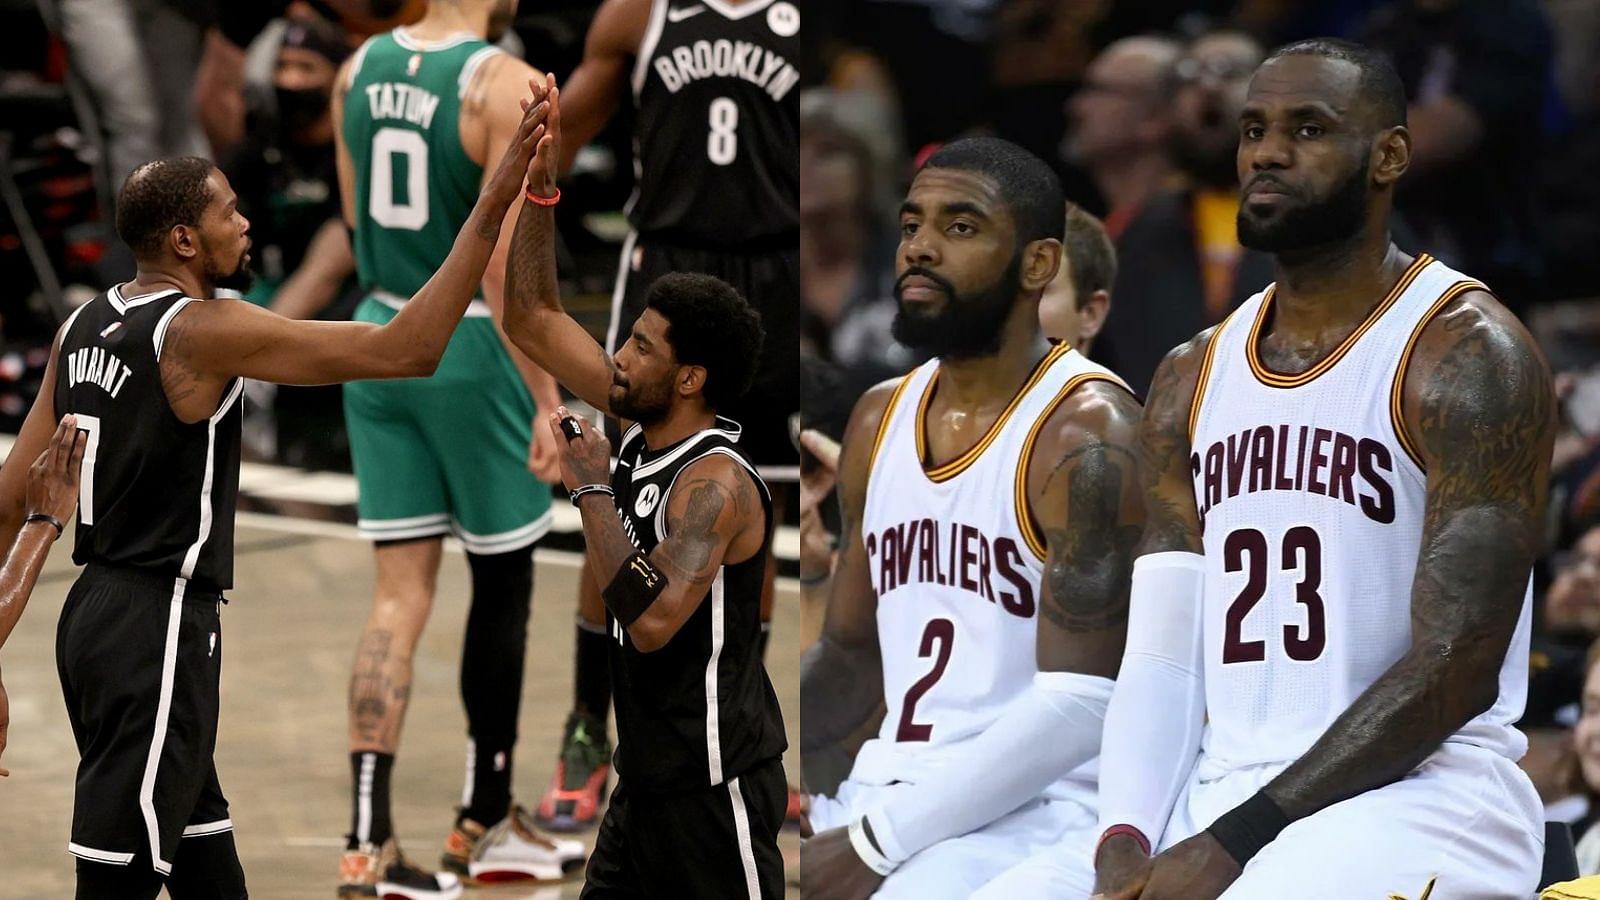 Kyrie Irving has a 11-11 playoff record since leaving LeBron James’ Cavaliers, before that it was 38-13